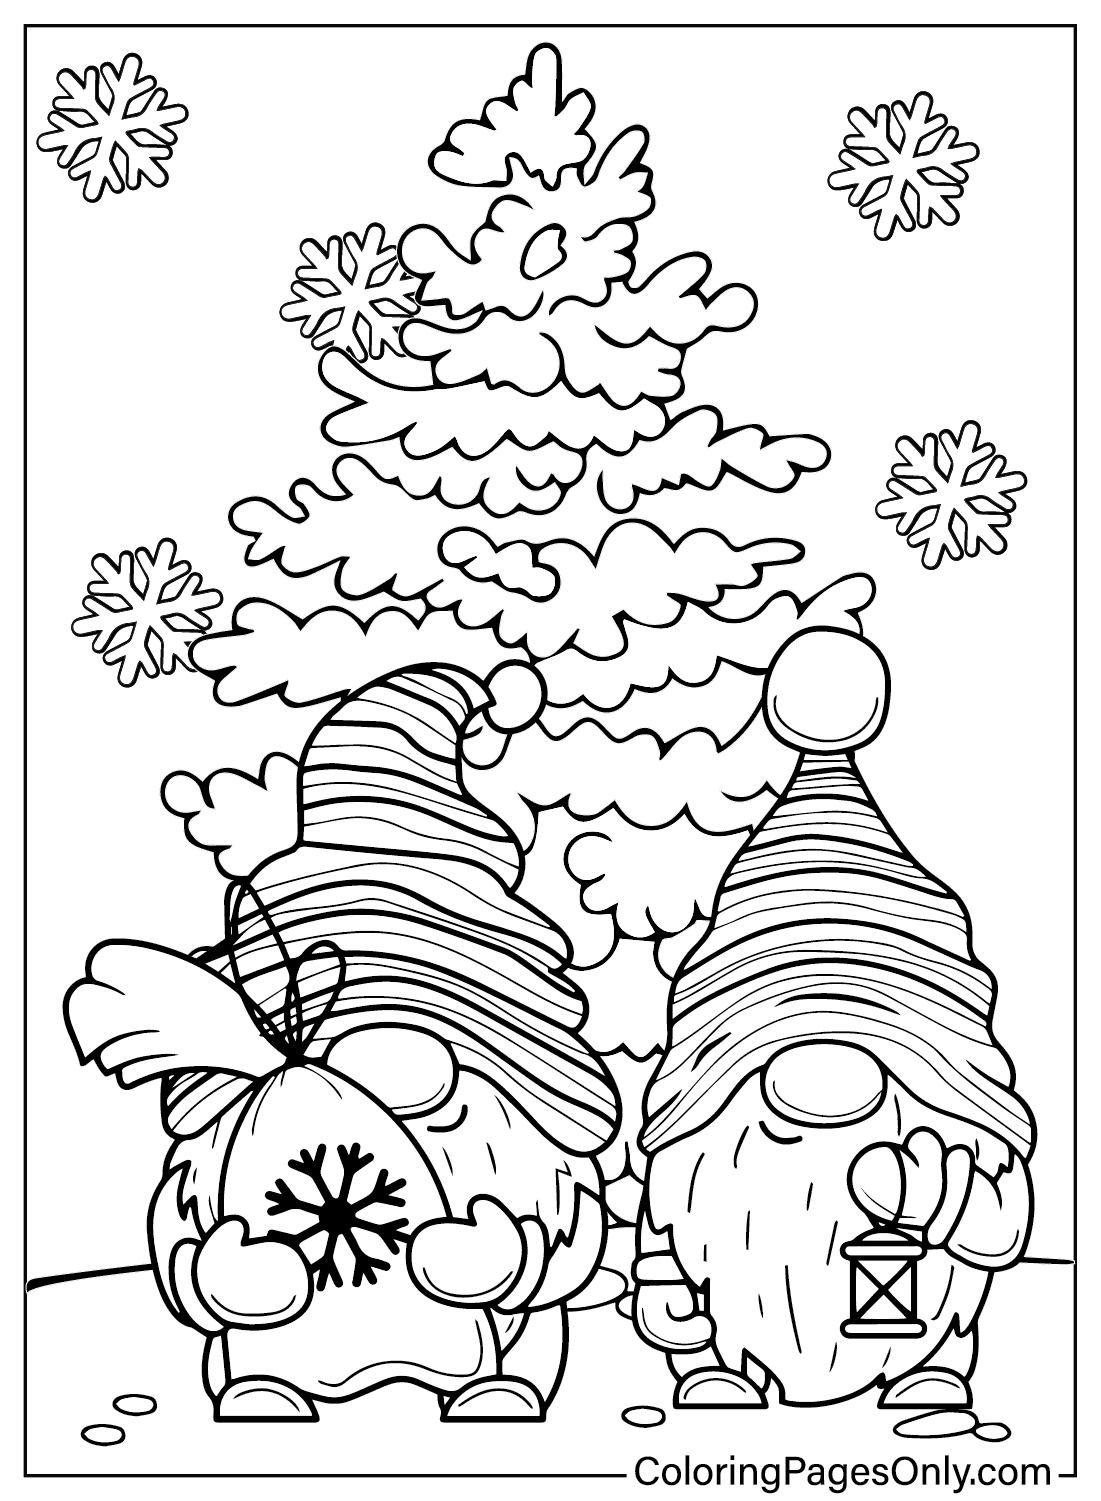 Free Gnome Coloring Page